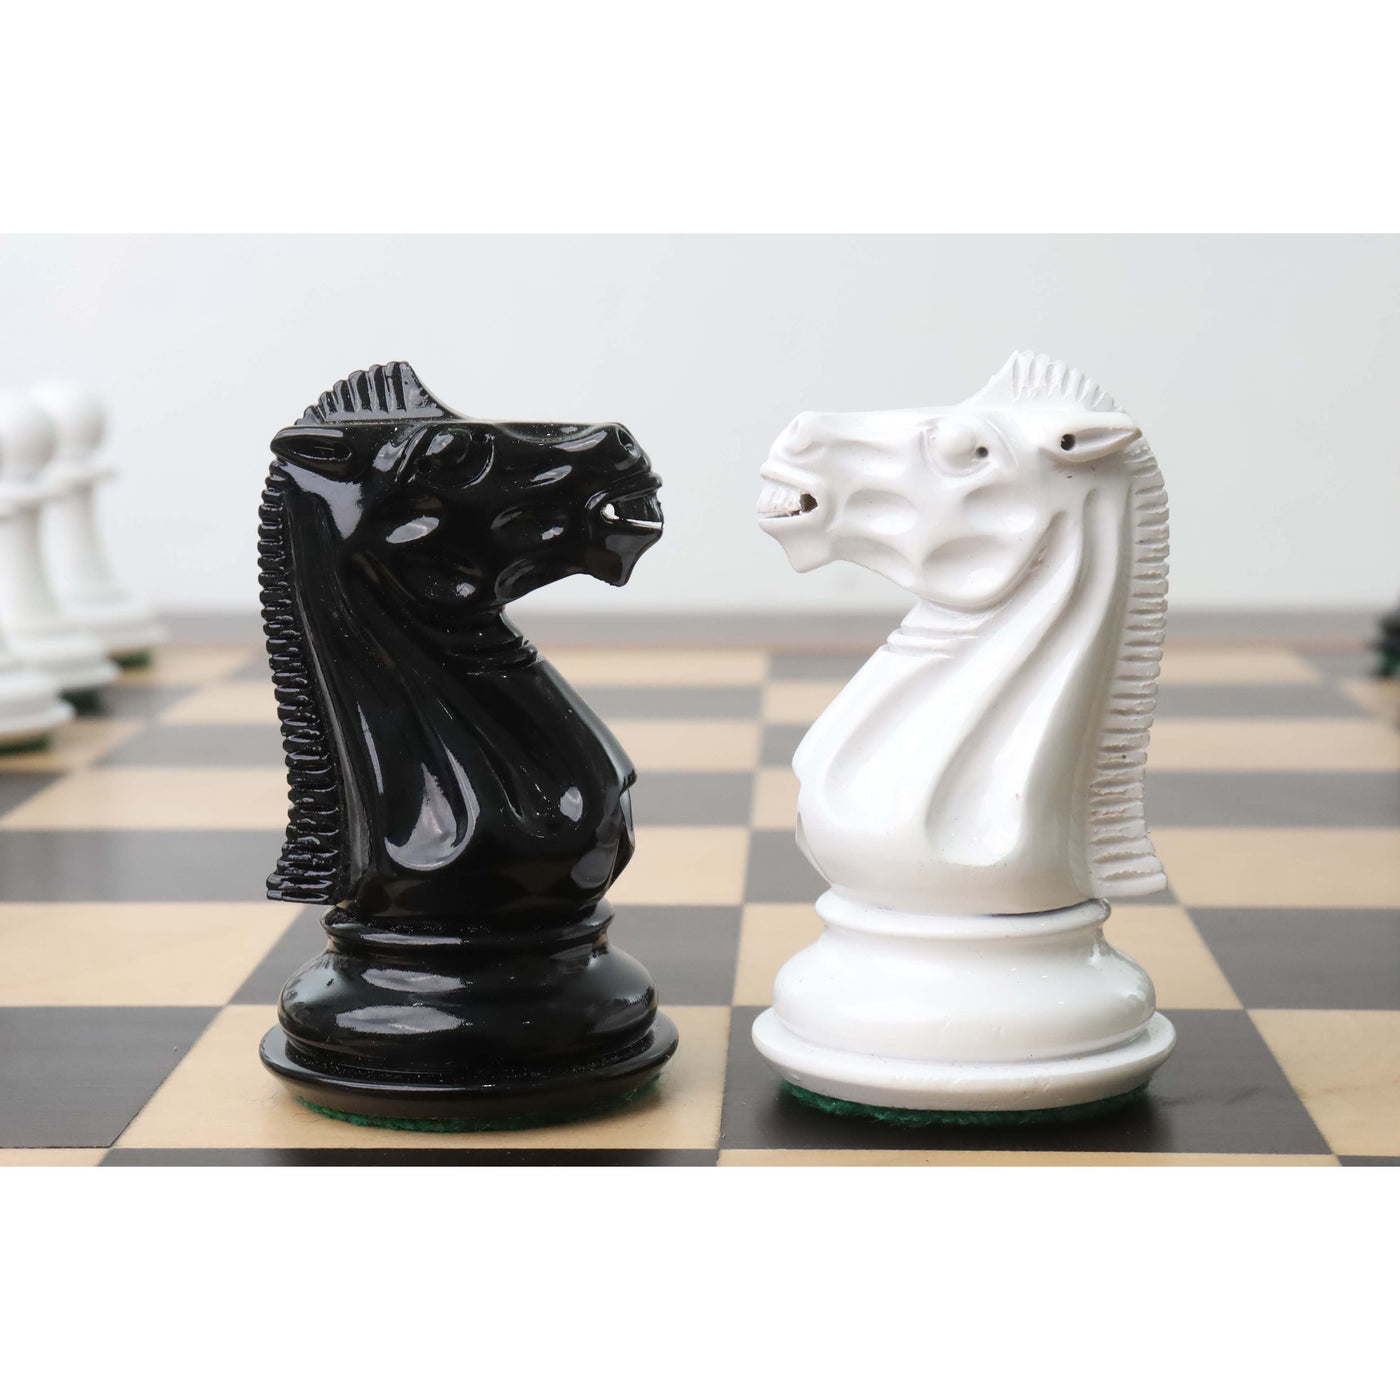 1940s' Soviet Reproduced Chess Set - Chess Pieces Only - Black and White Lacquer Boxwood